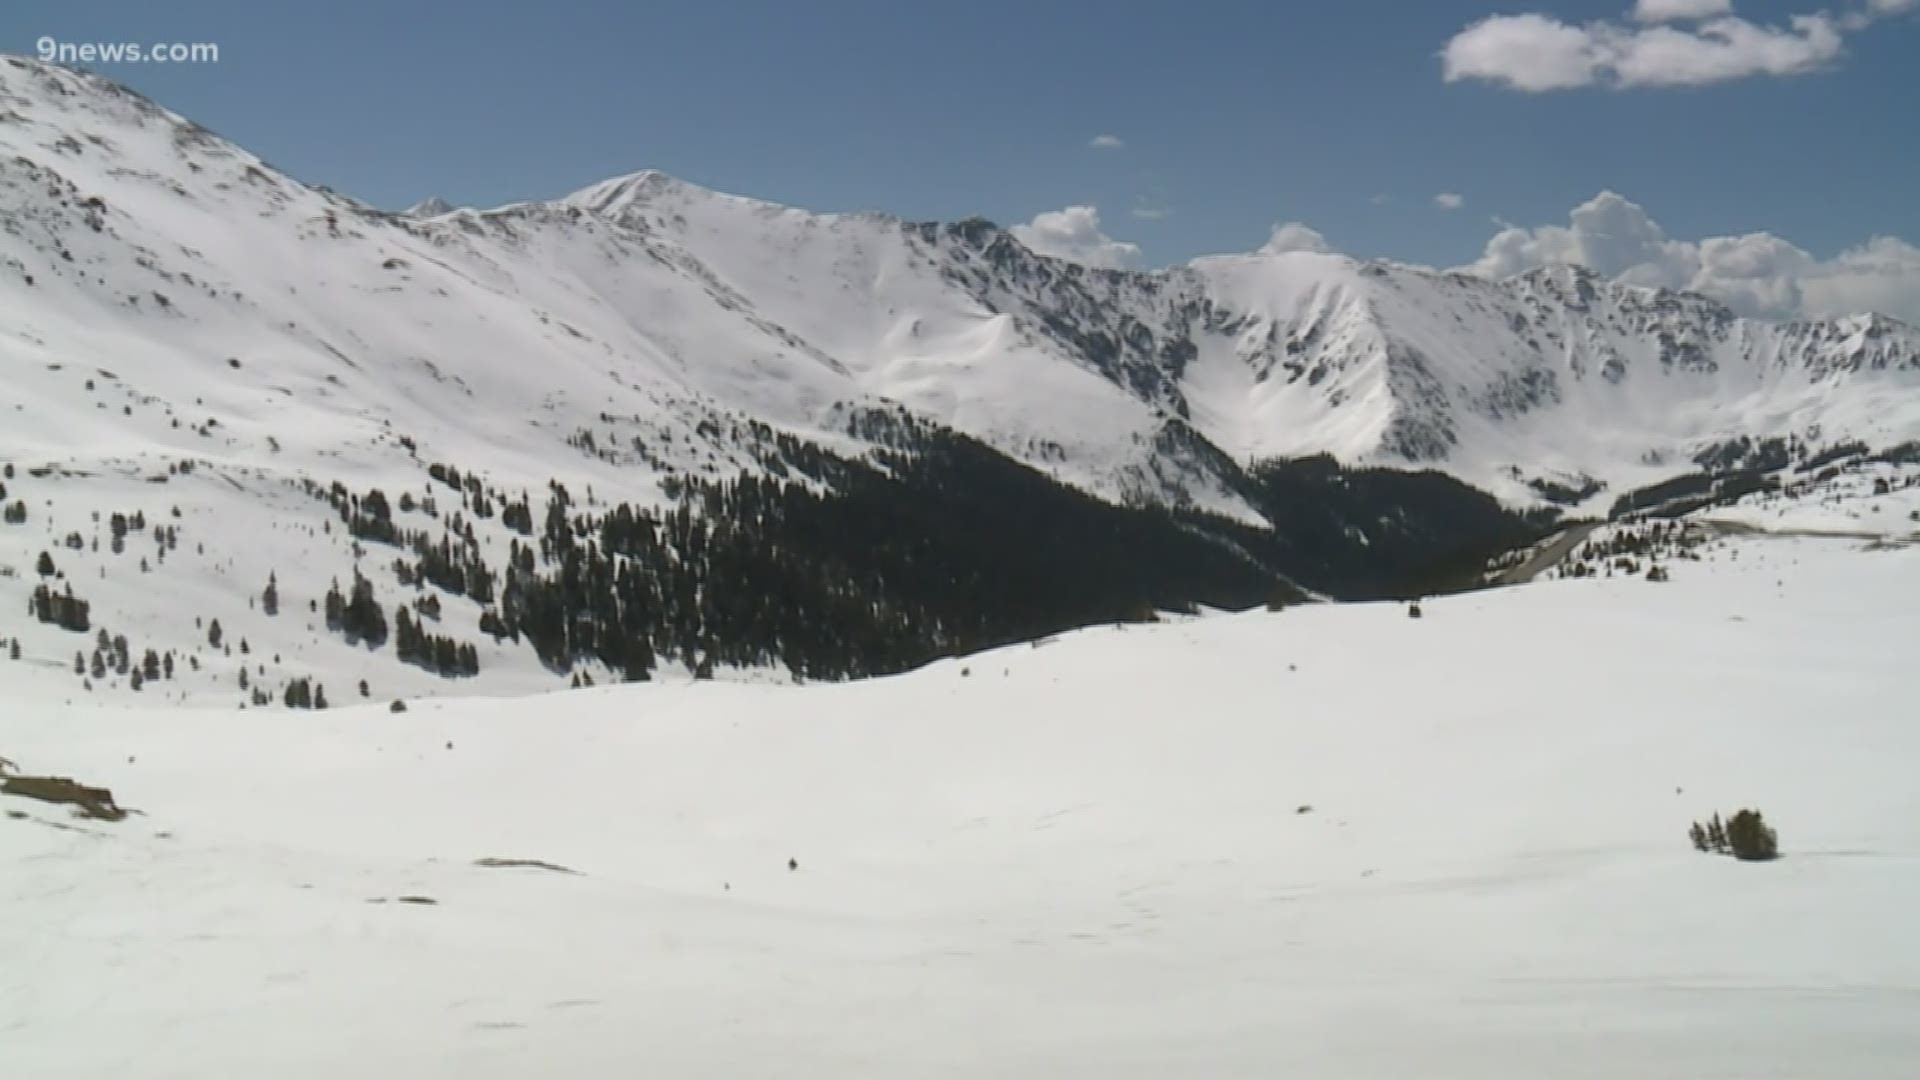 October 2019 may be remembered in Colorado as Snow-tober. The Front Range and most of the mountains finished the month with well above average snow.